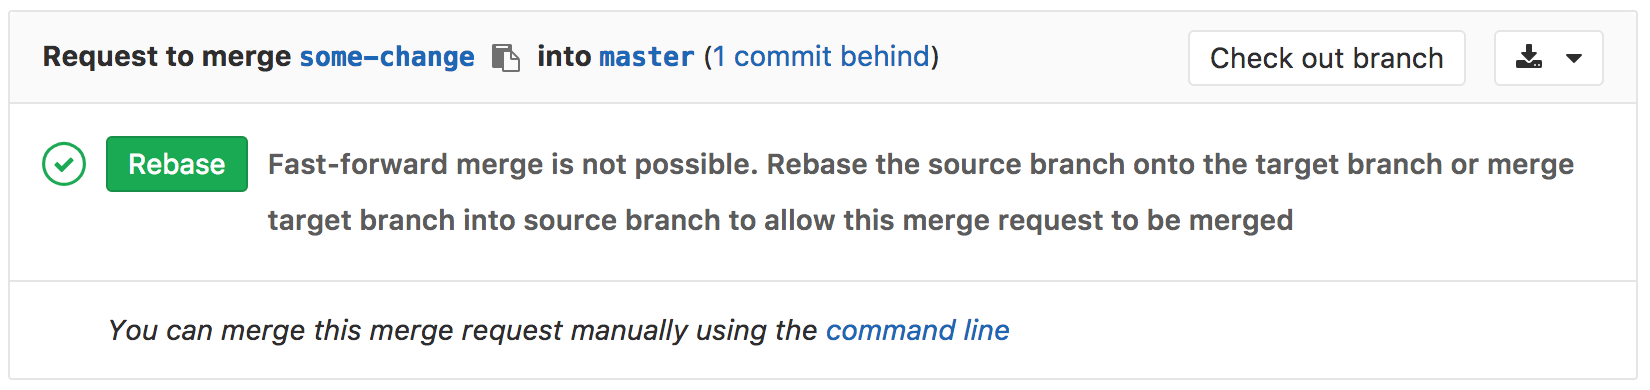 doc/user/project/merge_requests/img/ff_merge_rebase.png